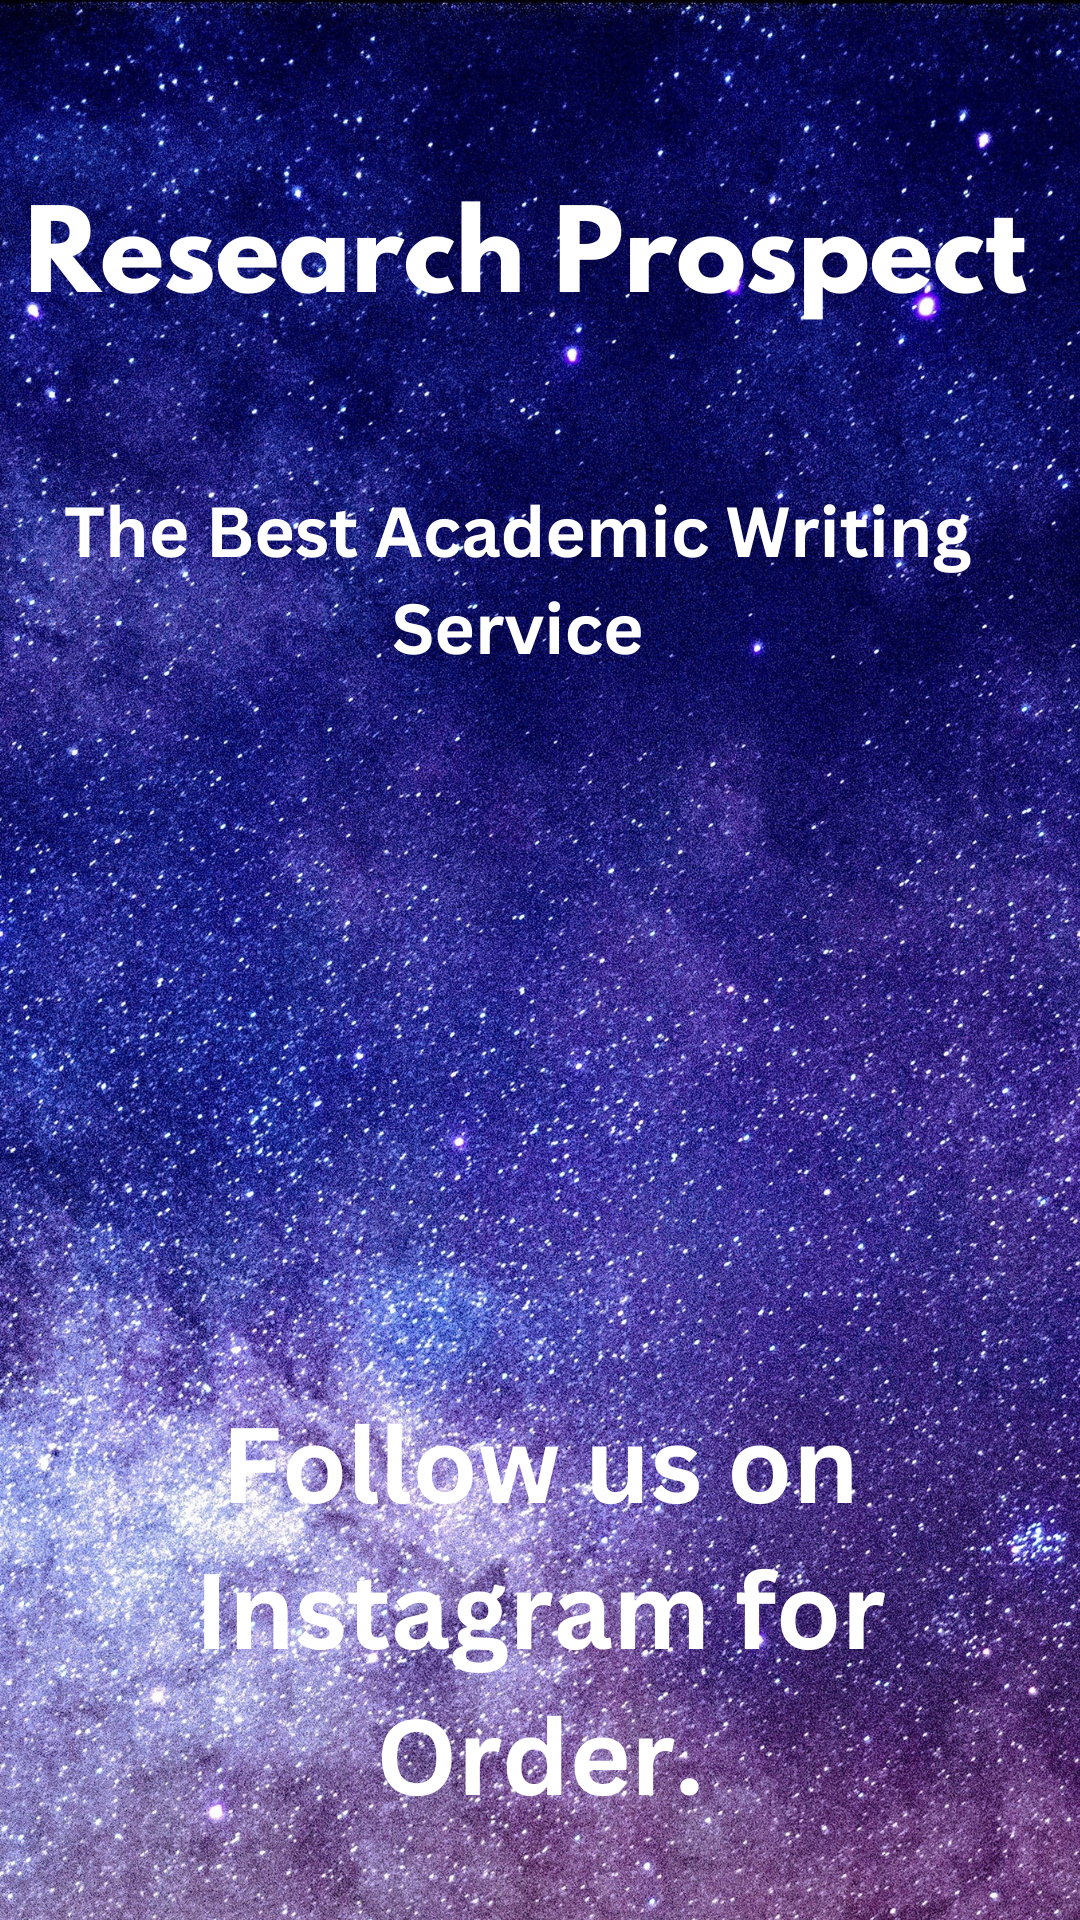 Where Can Students Find Professional Assignment Writers?